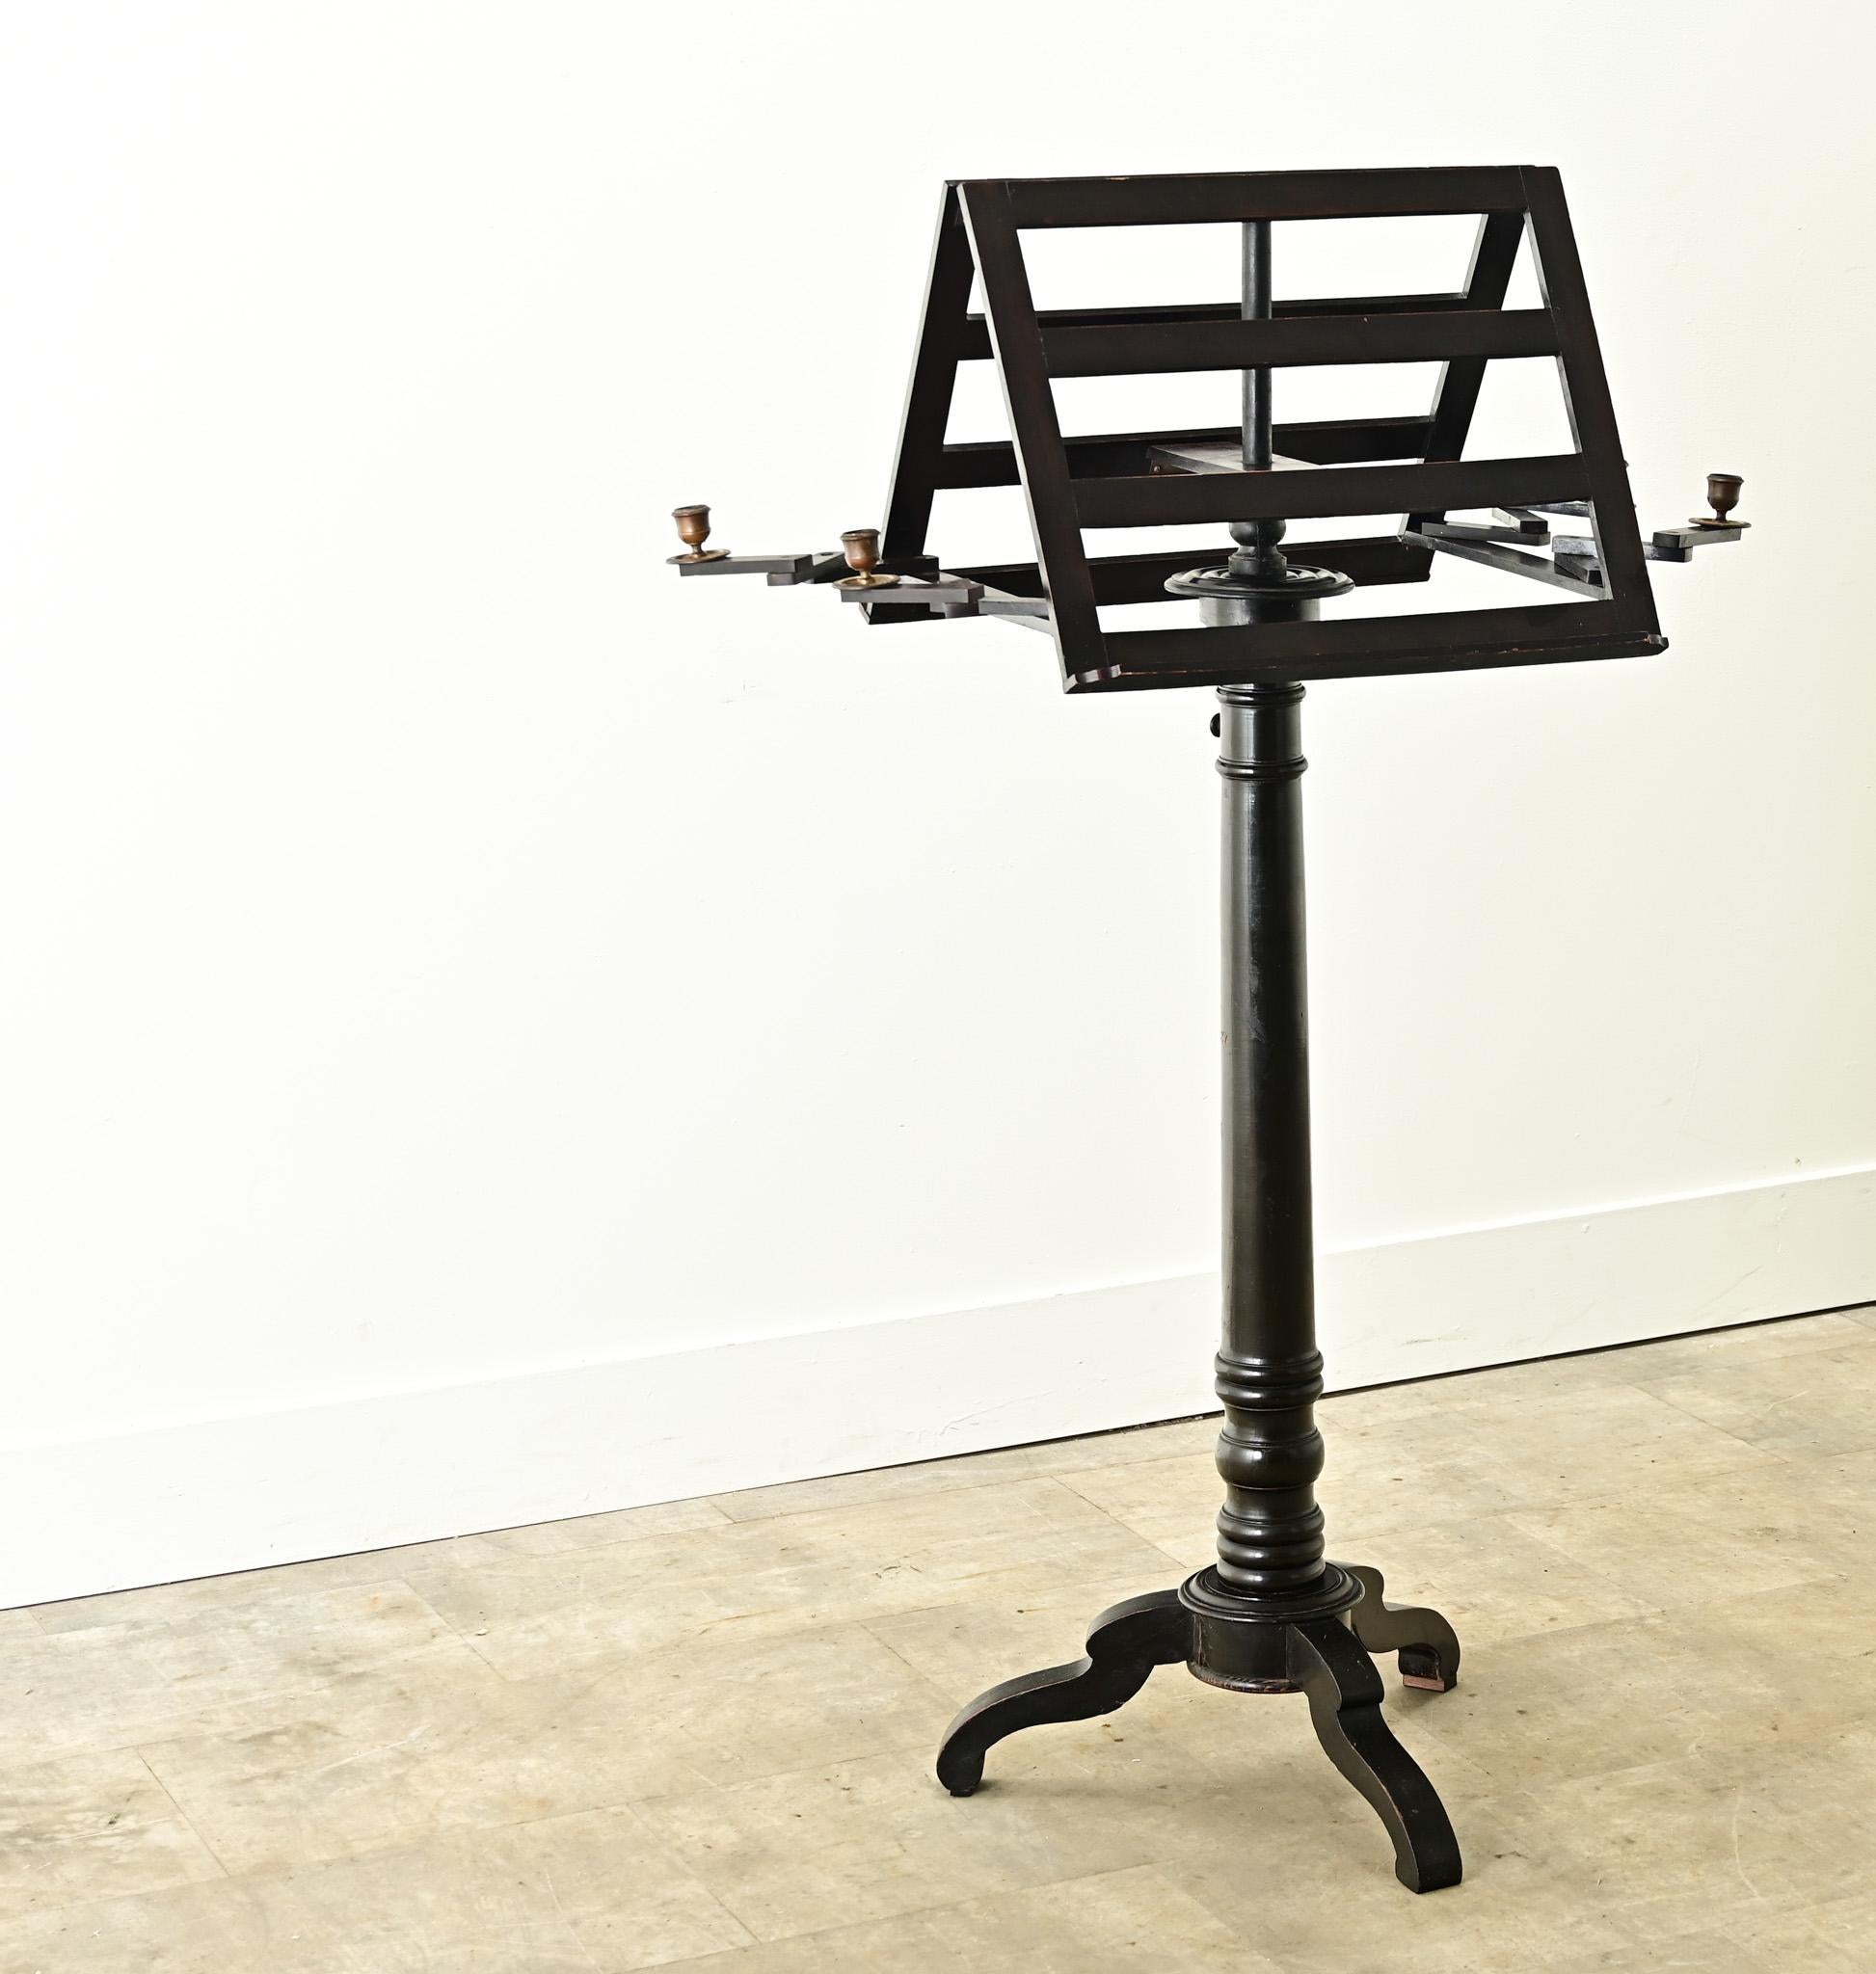 A French ebonized duet stand made in the 1800’s. This antique was built for duet performances with back to back sheet music stands and adjustable brass candle holders. The functional stand is raised on a carved and turned column form base with three